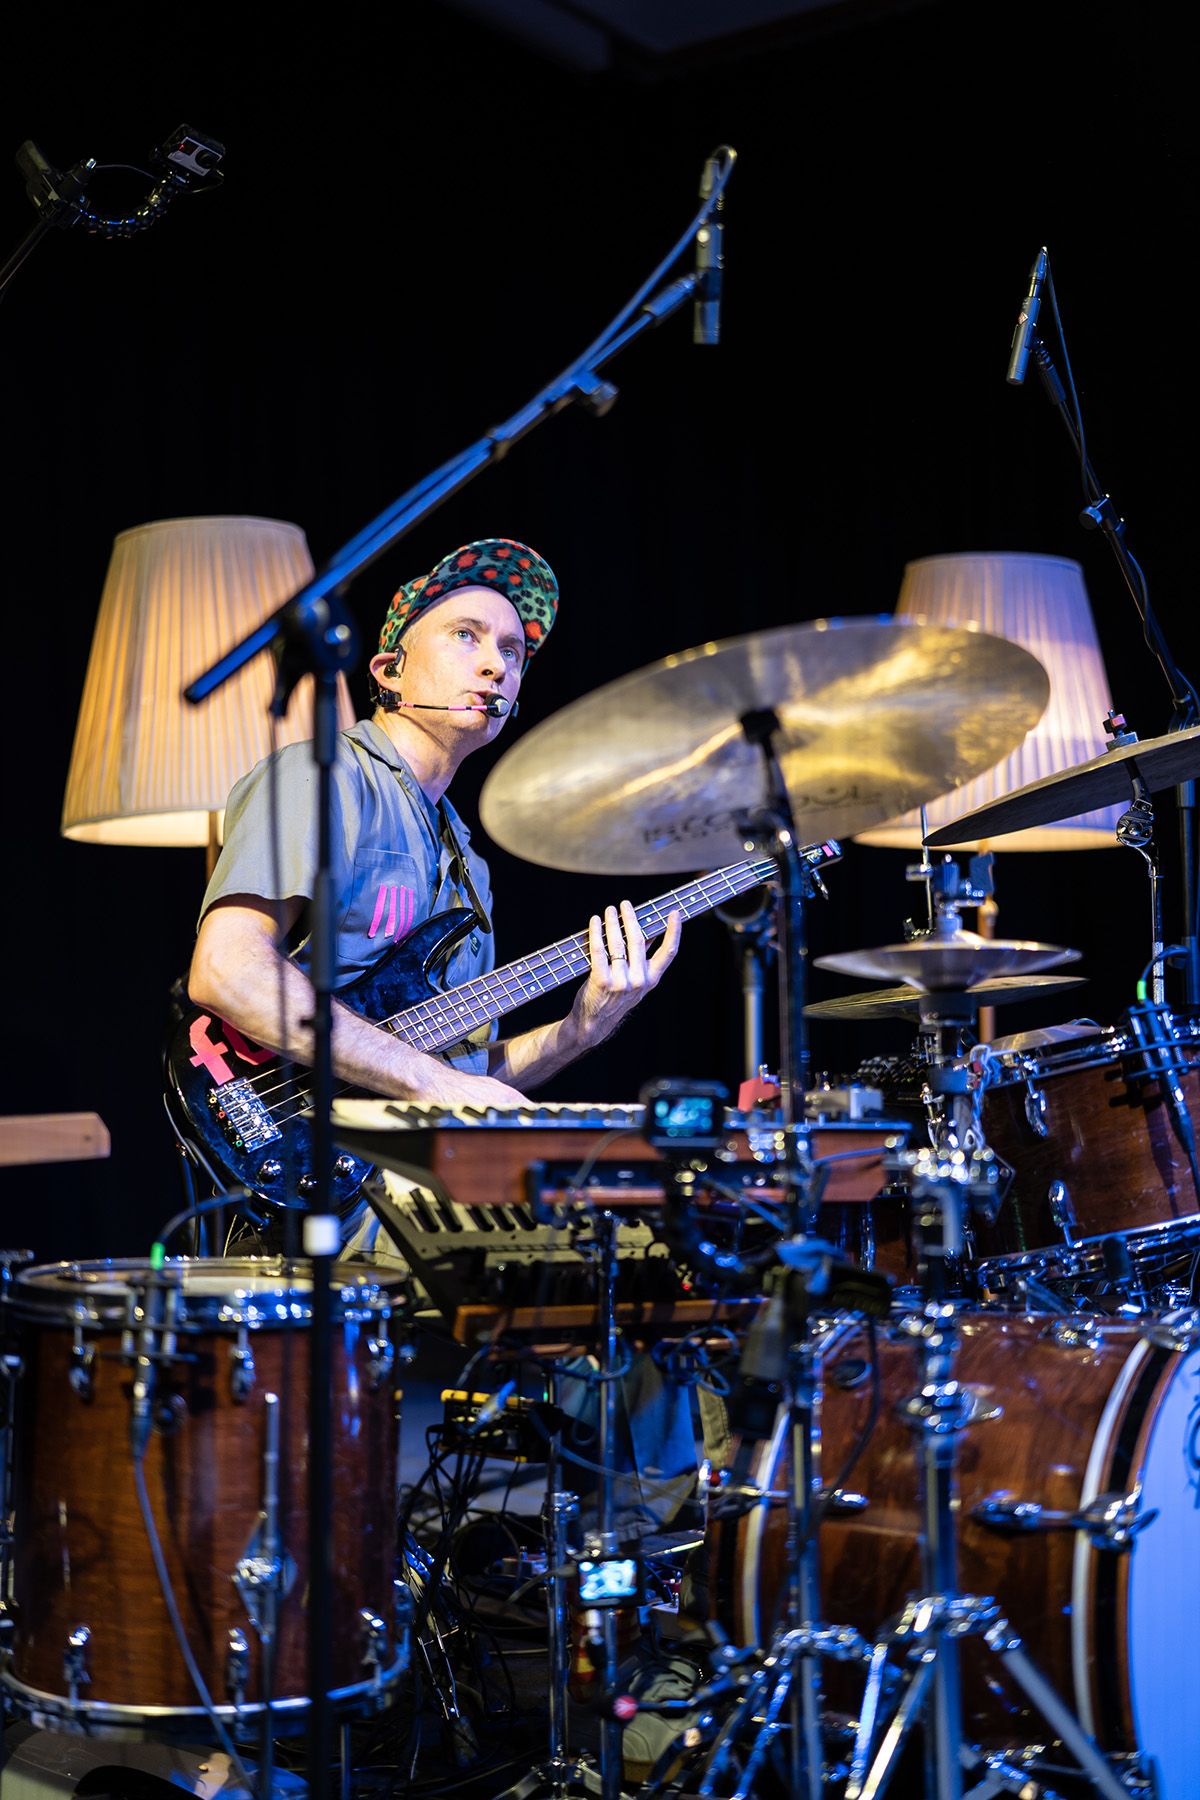 Nate Wood \u2013 Project fOUR \u2013 Supported by STAC (Steve Newcomb & Isaac Cavallaro)